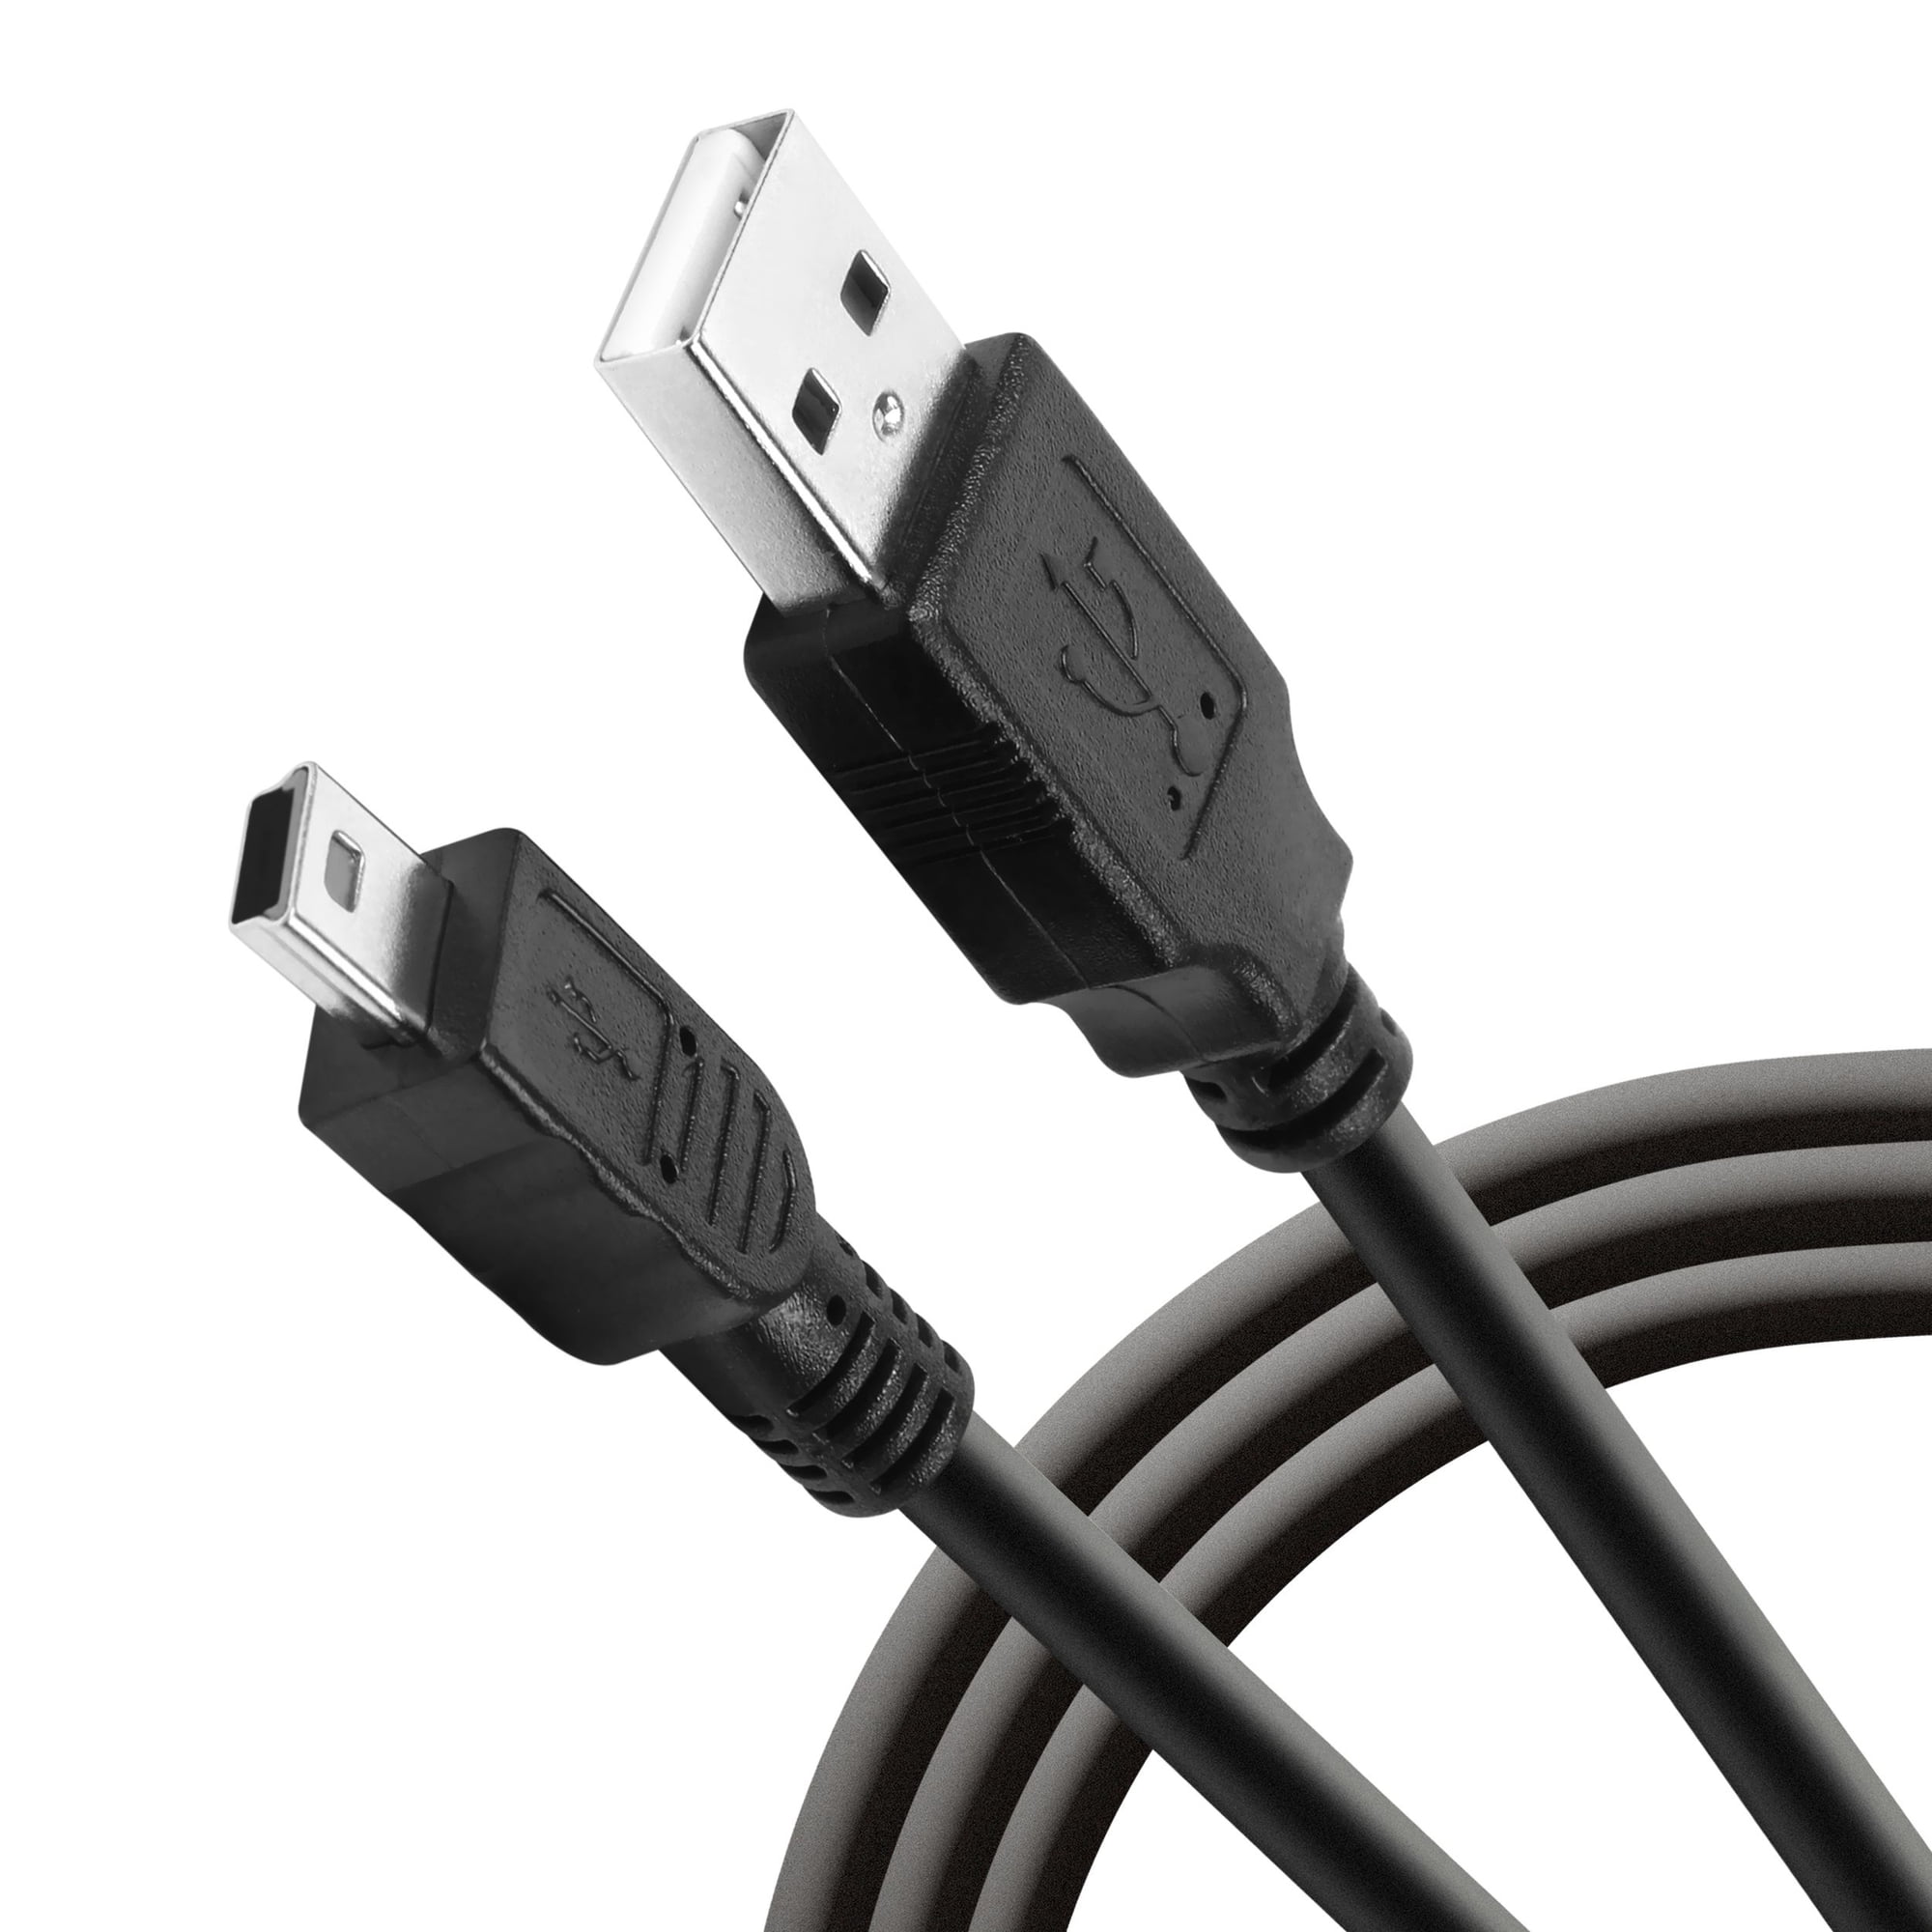 UGREEN Mini USB Cable, A-Male to Mini-B Cord USB 2.0 Charger Cable  Compatible